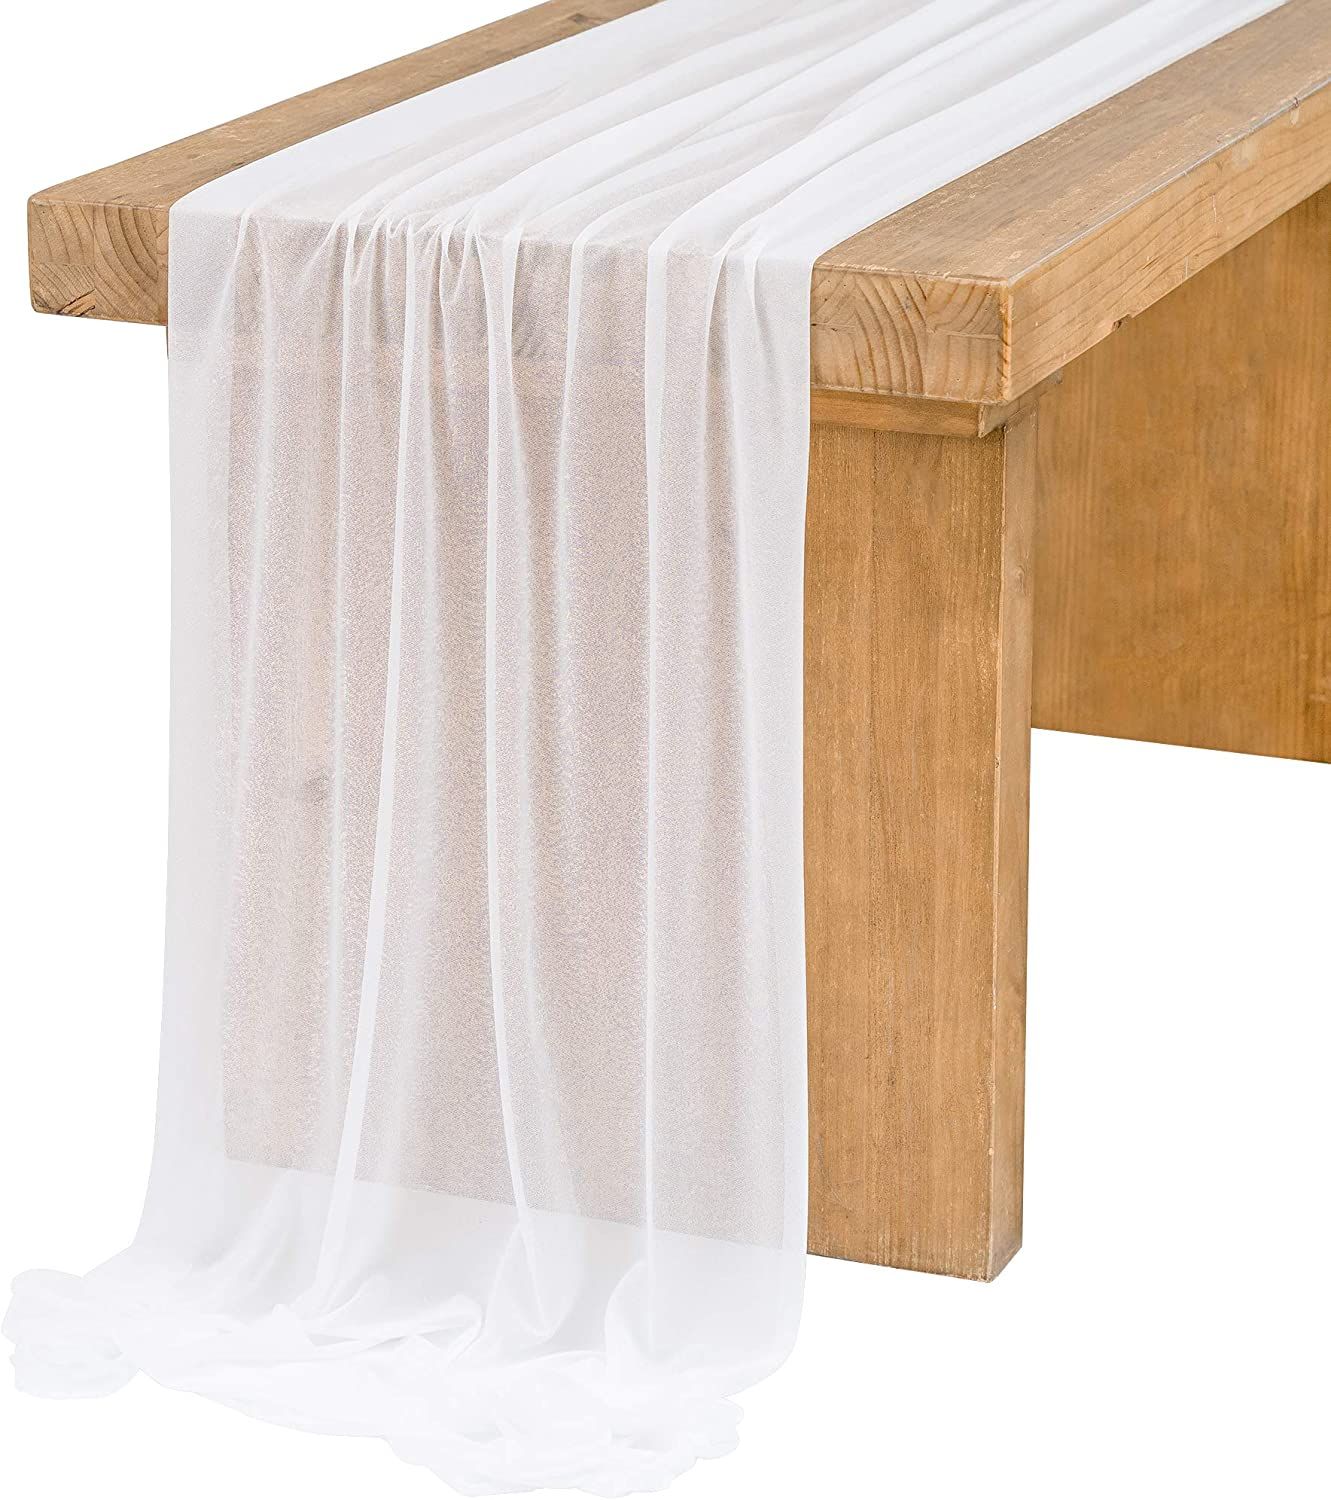 Ling's moment 14Ft Brilliant White Sheer Chiffon Like Table Runner for Rustic Boho Wedding Party ... | Amazon (US)